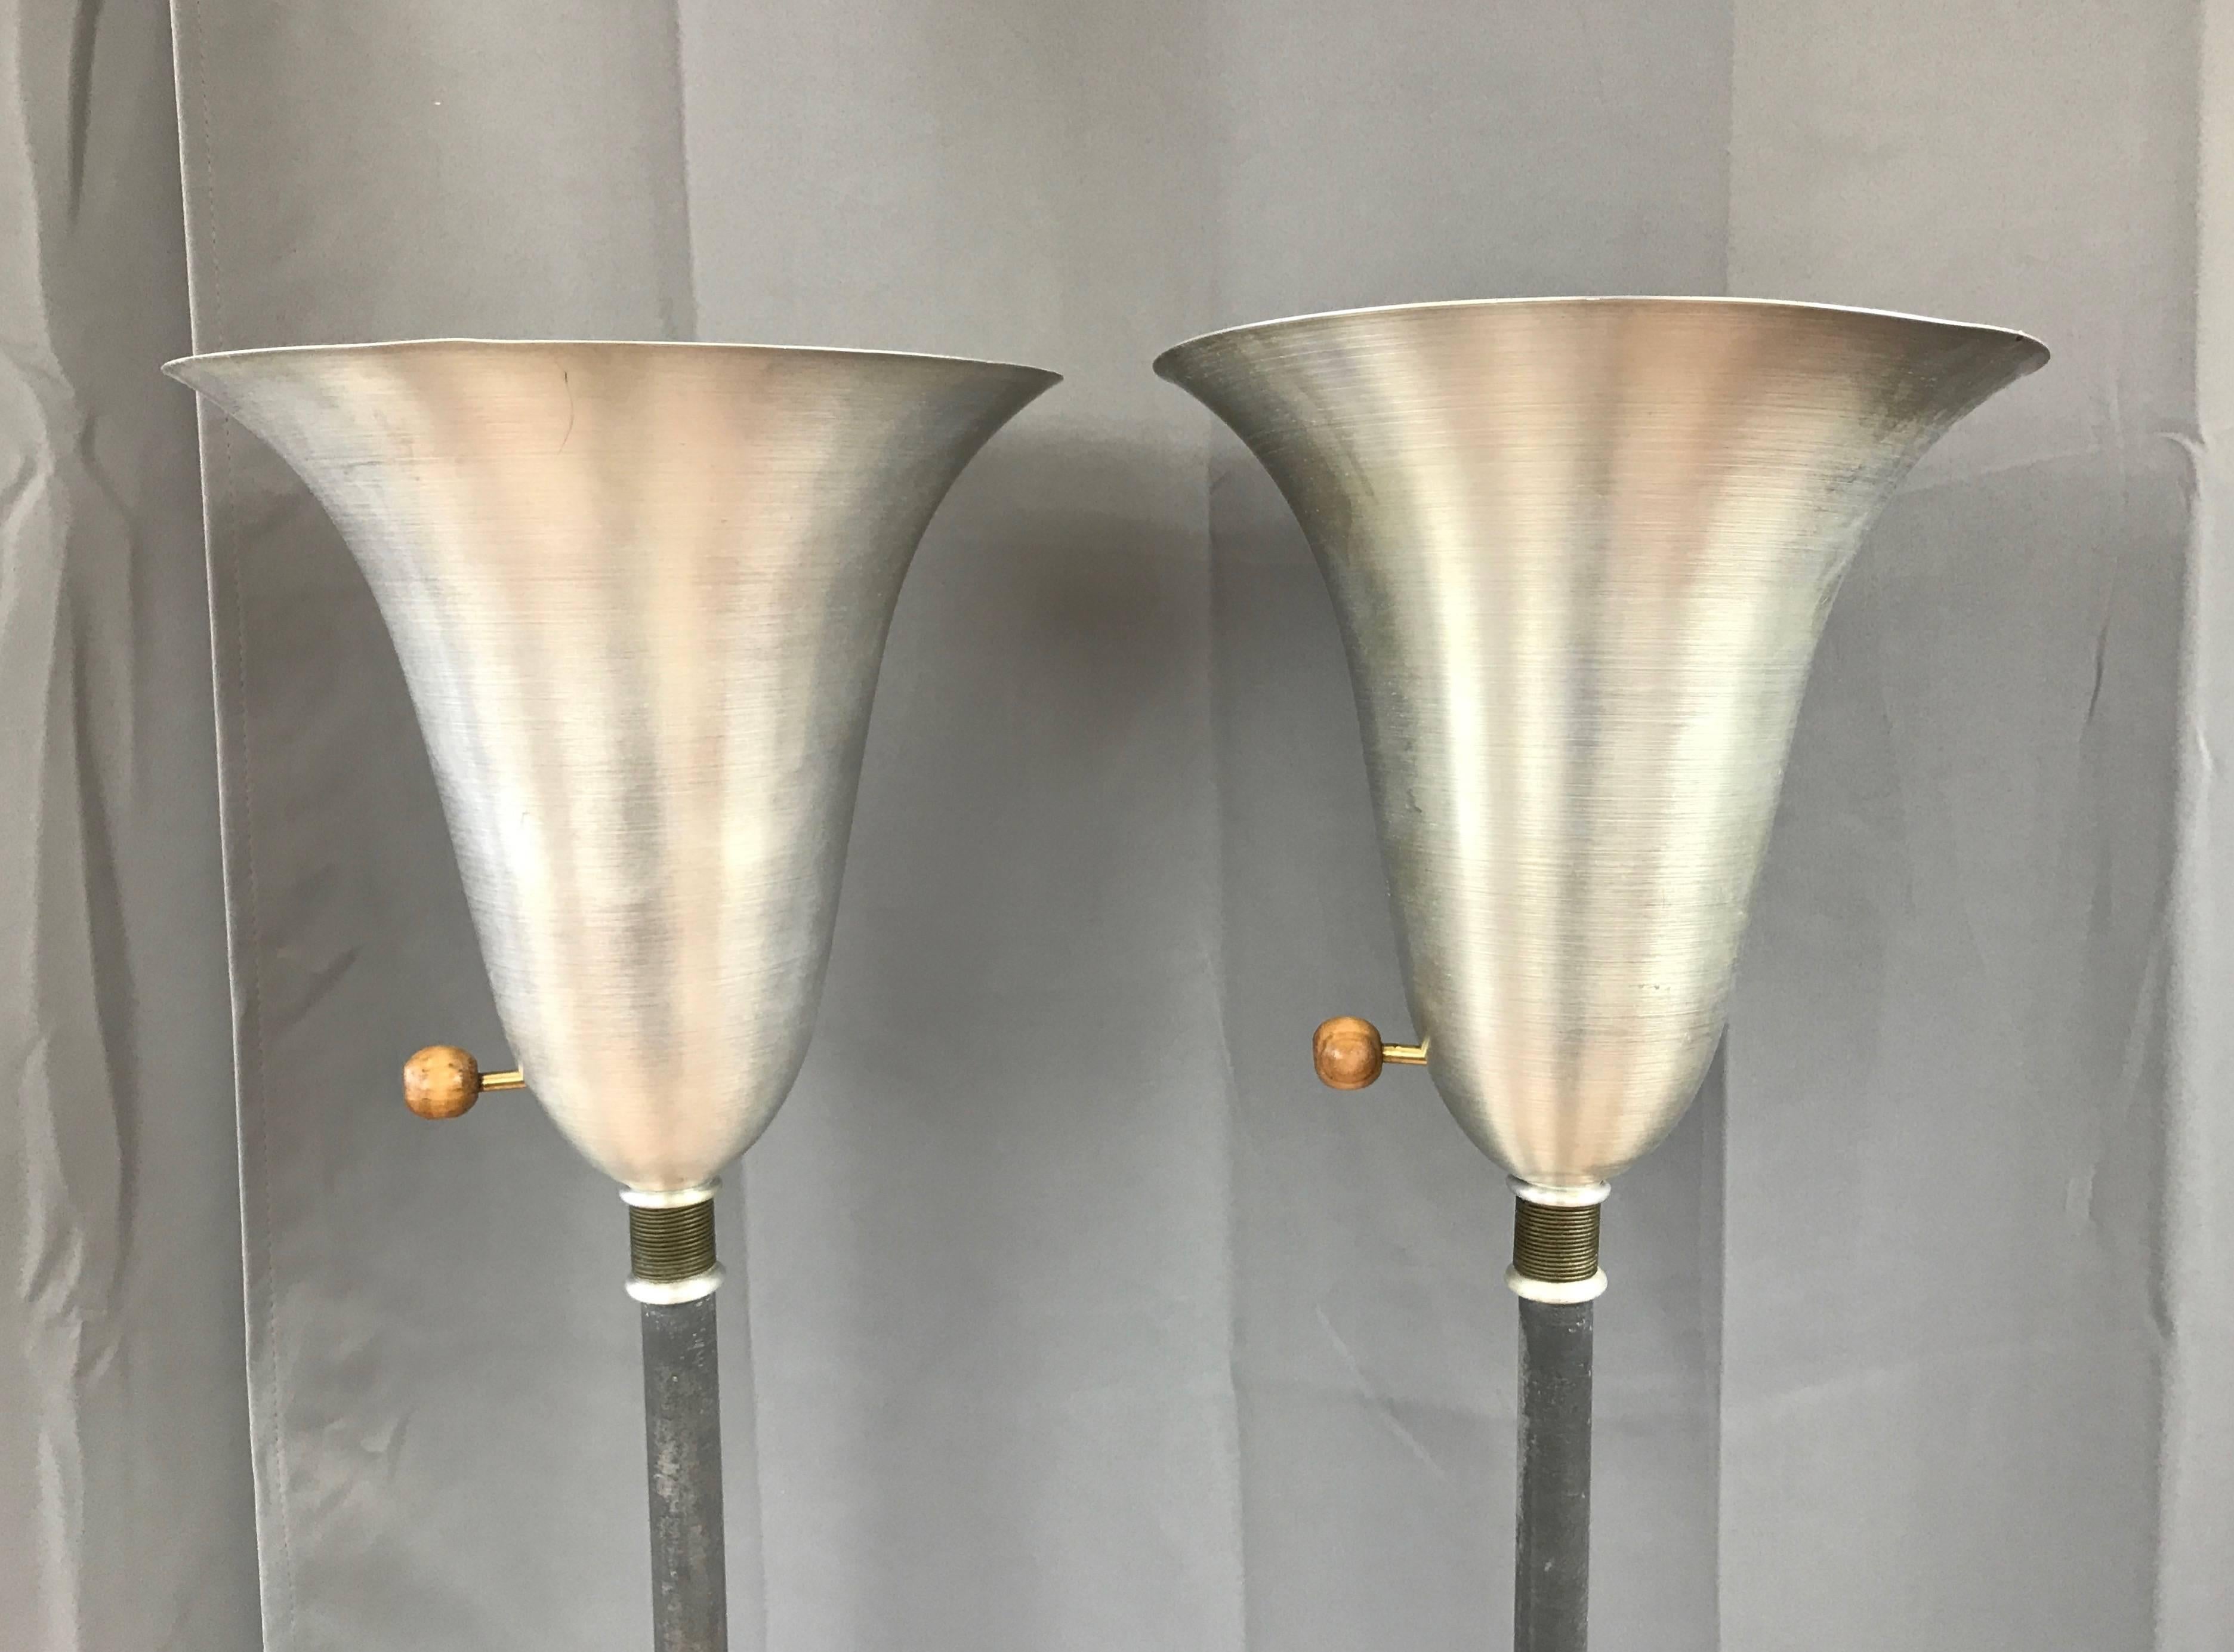 Mid-20th Century Pair of Russel Wright American Modern Aluminium and Brass Torchieres For Sale